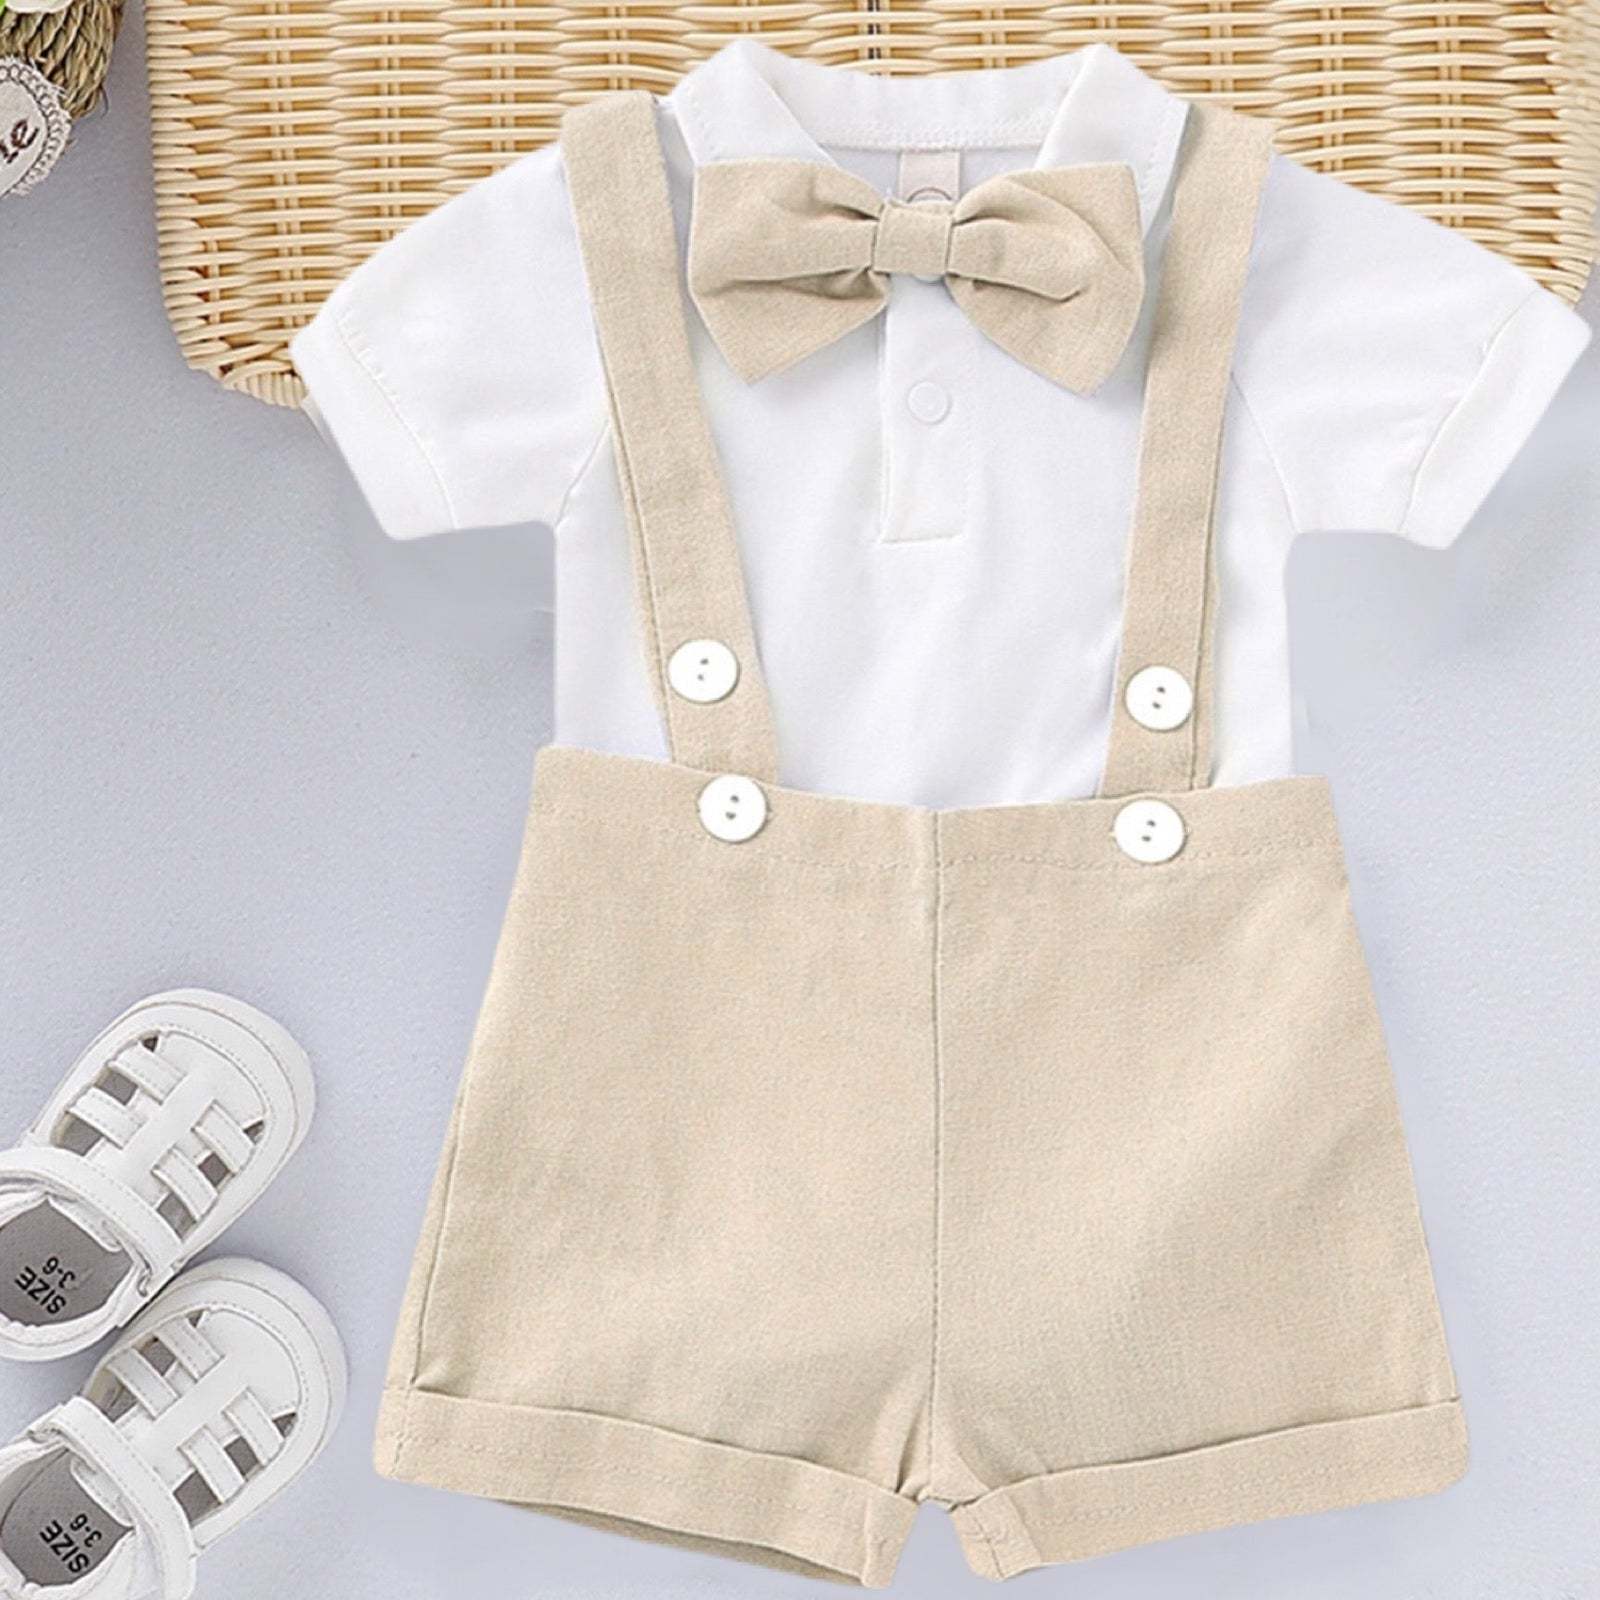 Infant Toddler Boys Easter Outfit, Shirt Shorts Suspenders & Bow Tie